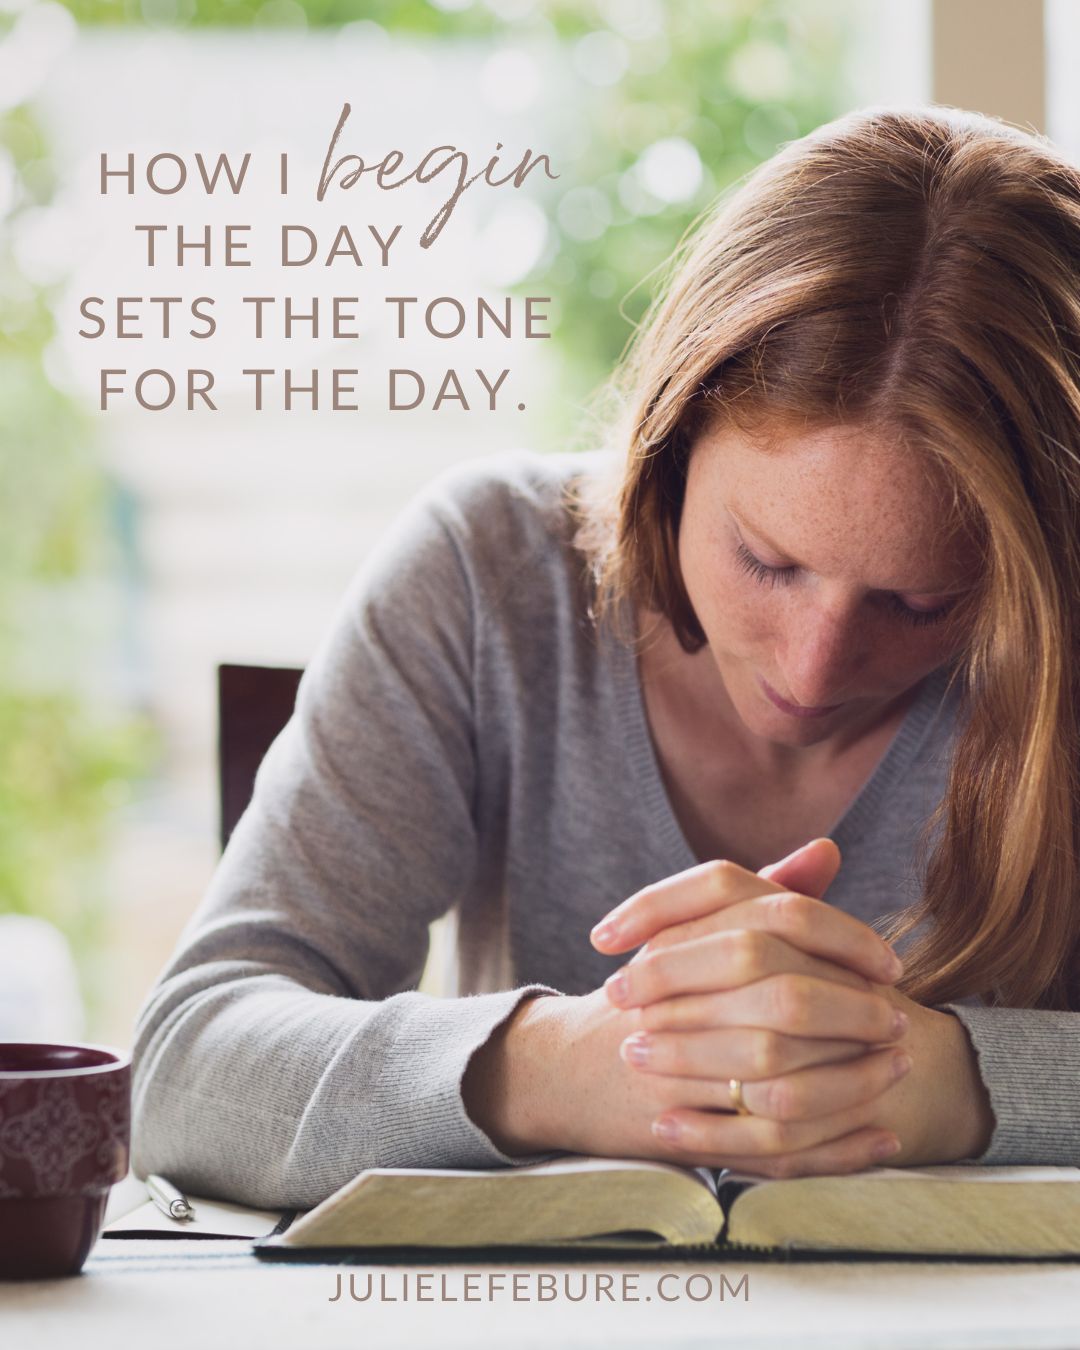 How I begin the day sets the tone for the day | woman praying with Bible open